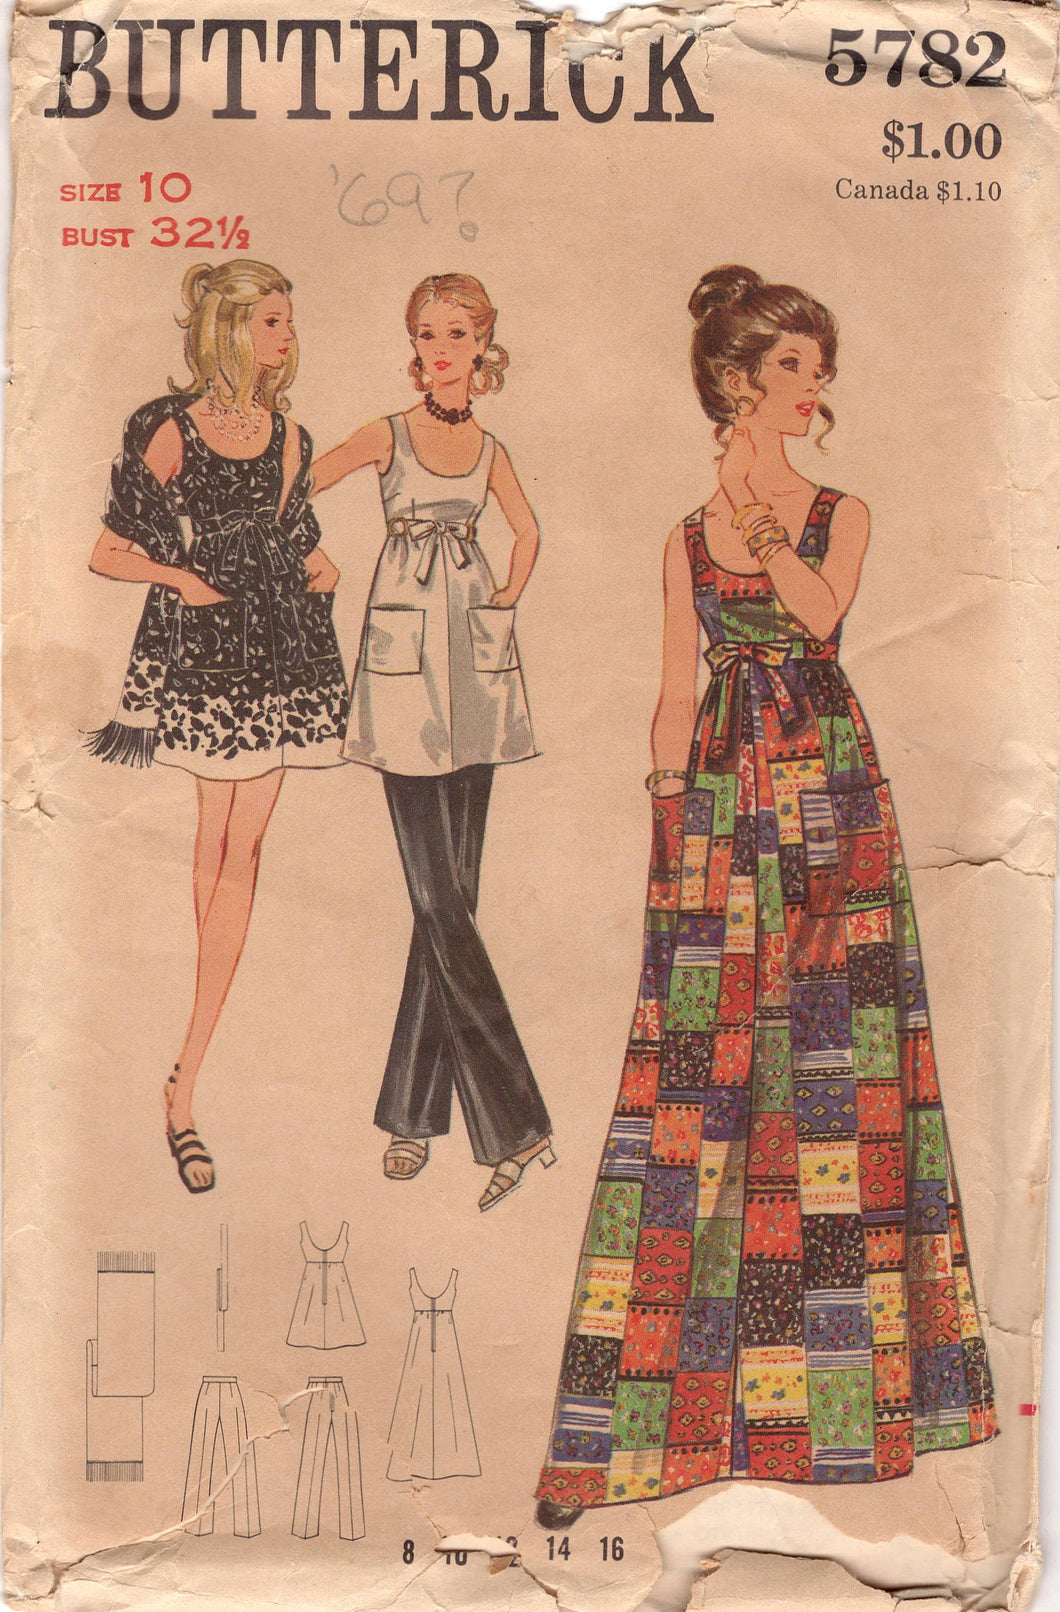 1960's Butterick One Piece Midi or Maxi Dress with Scoop Neckline, Straight Leg Pants and Shawl Pattern - Bust 32.5